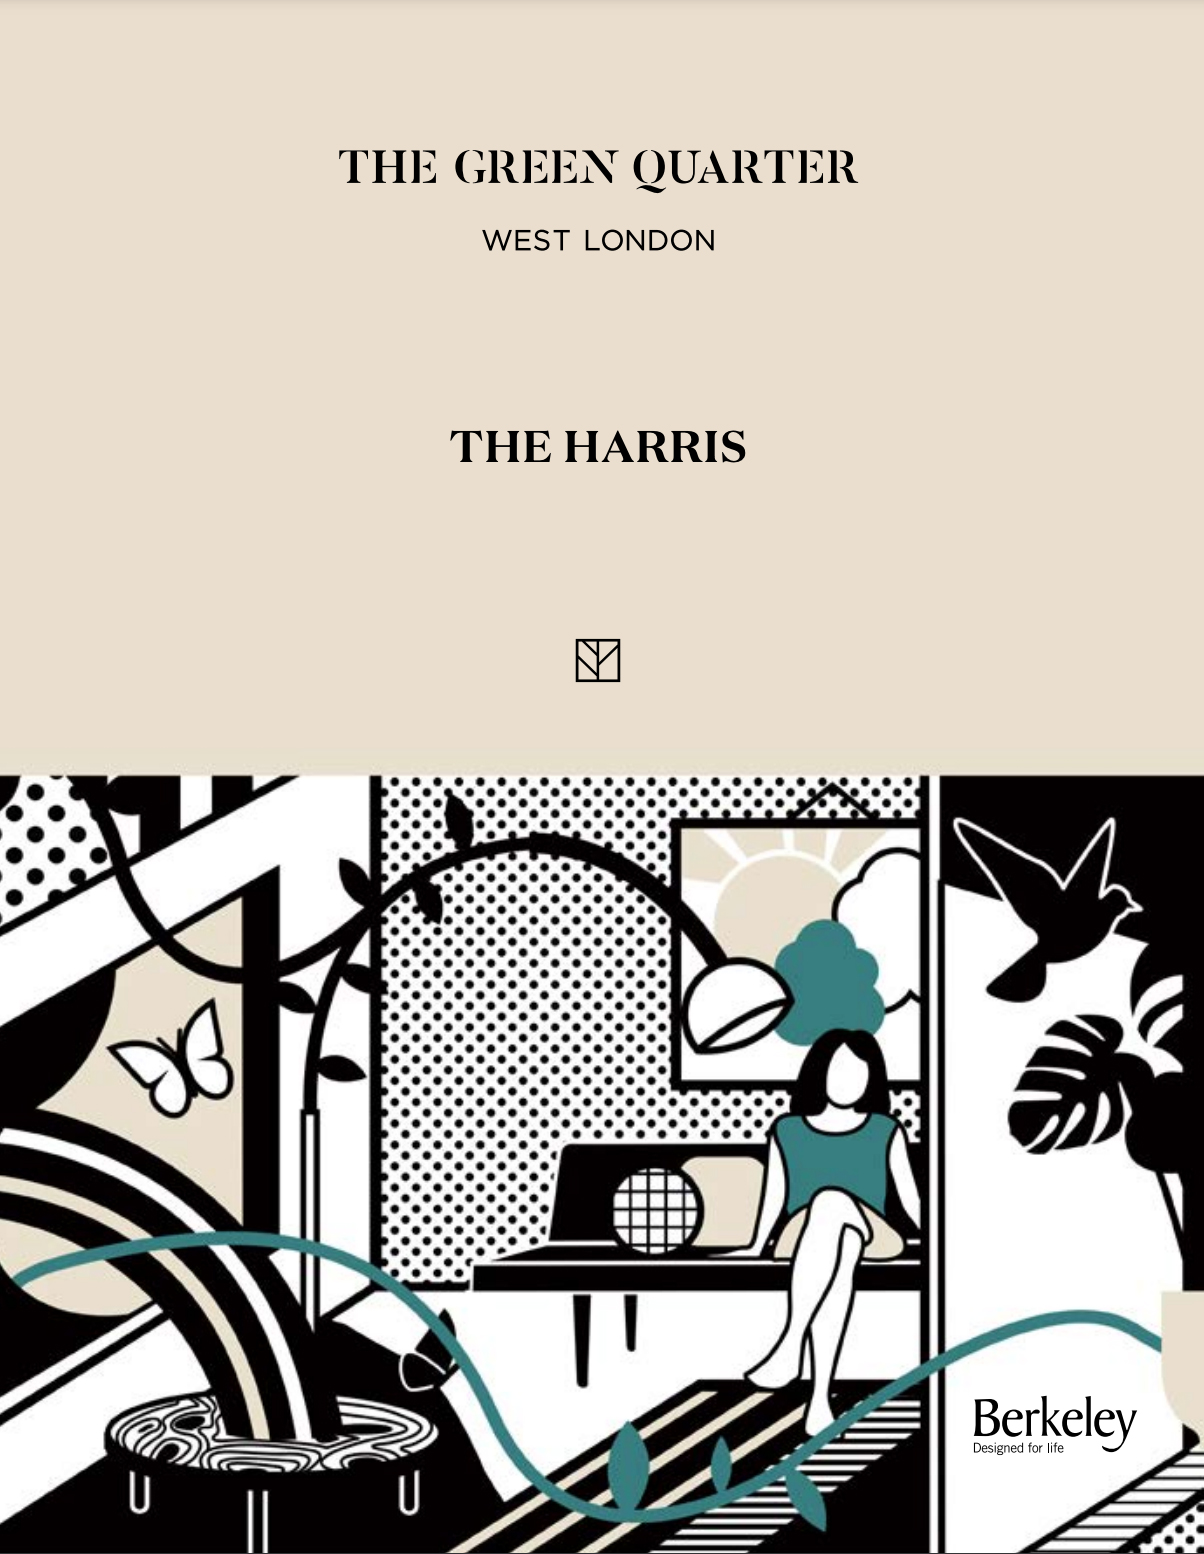 Just launched - The Harris show home